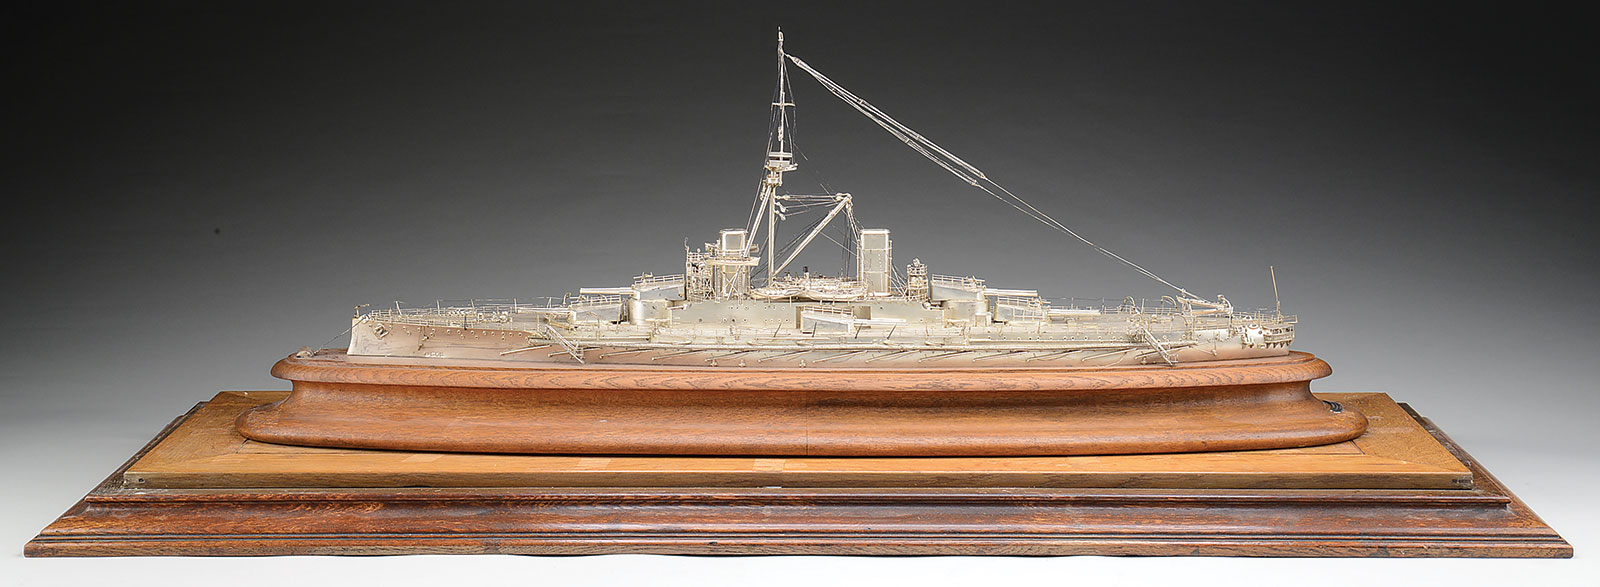 Scale Model of the British-Built Brazilian Battleship "Minas Gereas" from the Ray Bentley Collection, estimated at $10,000-20,000.